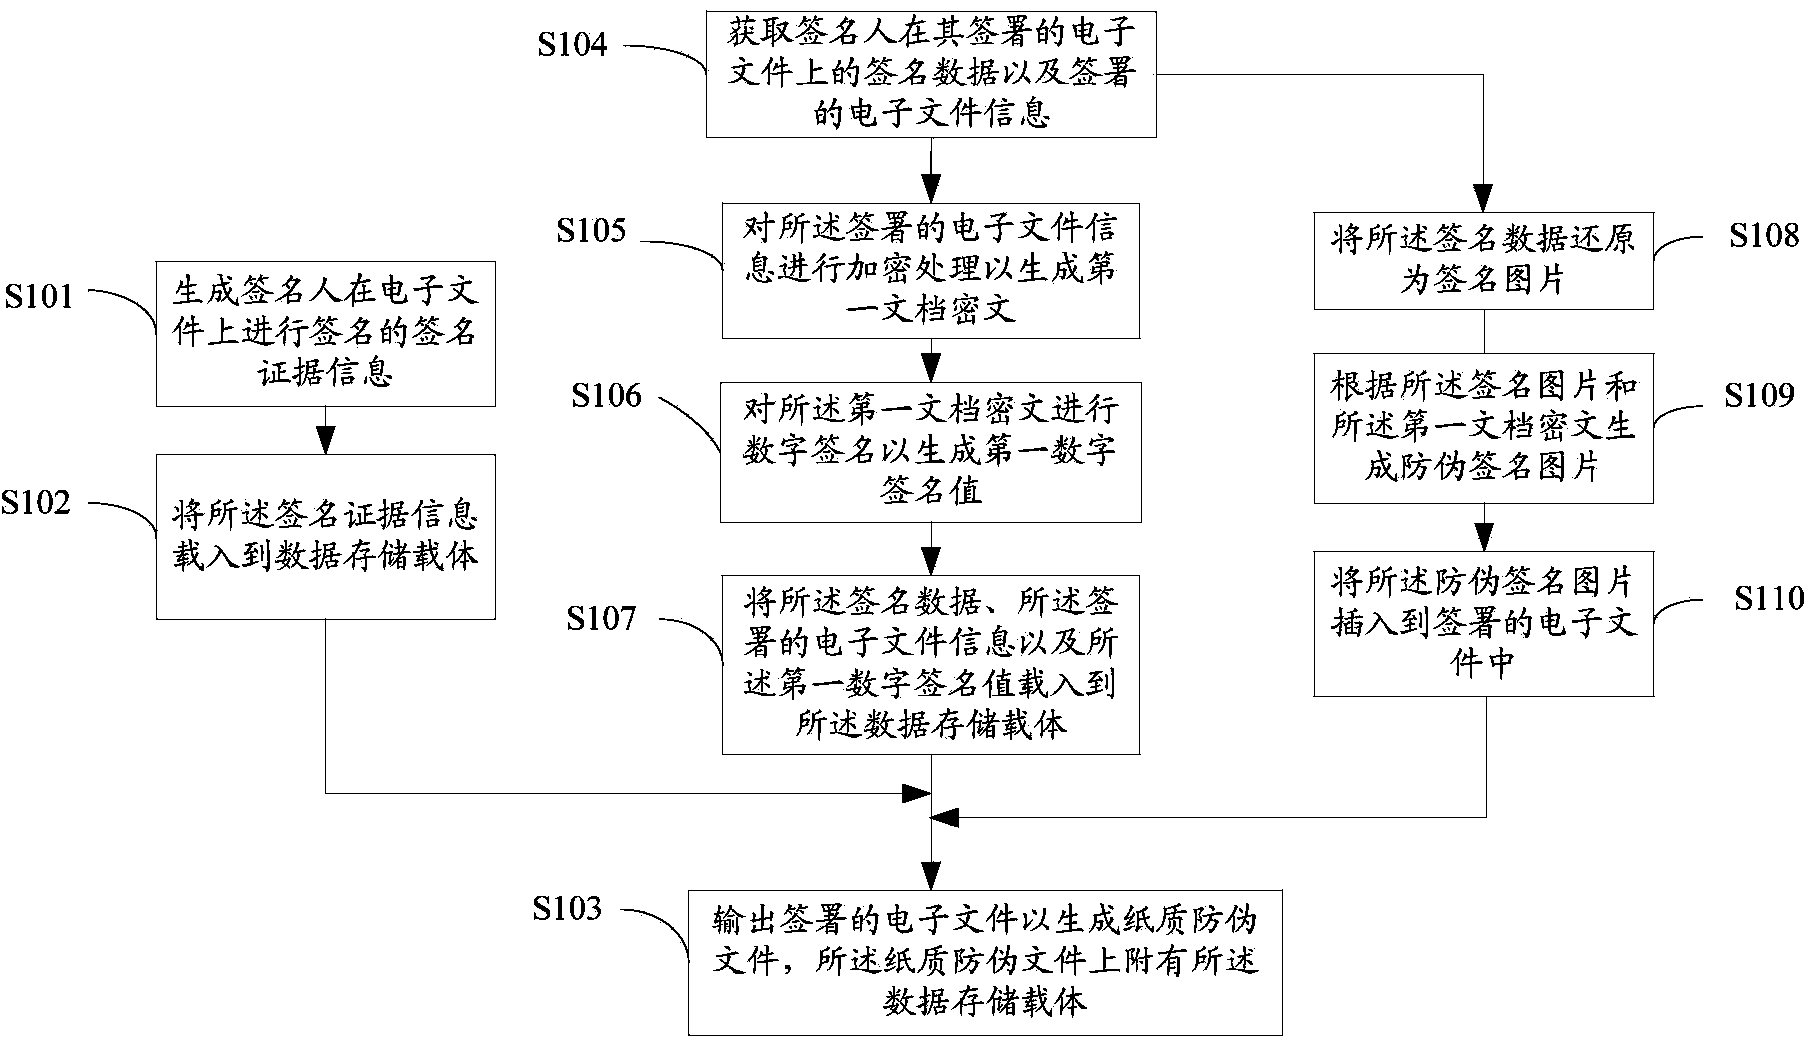 Methods and devices for generating and distinguishing anti-counterfeiting paper document